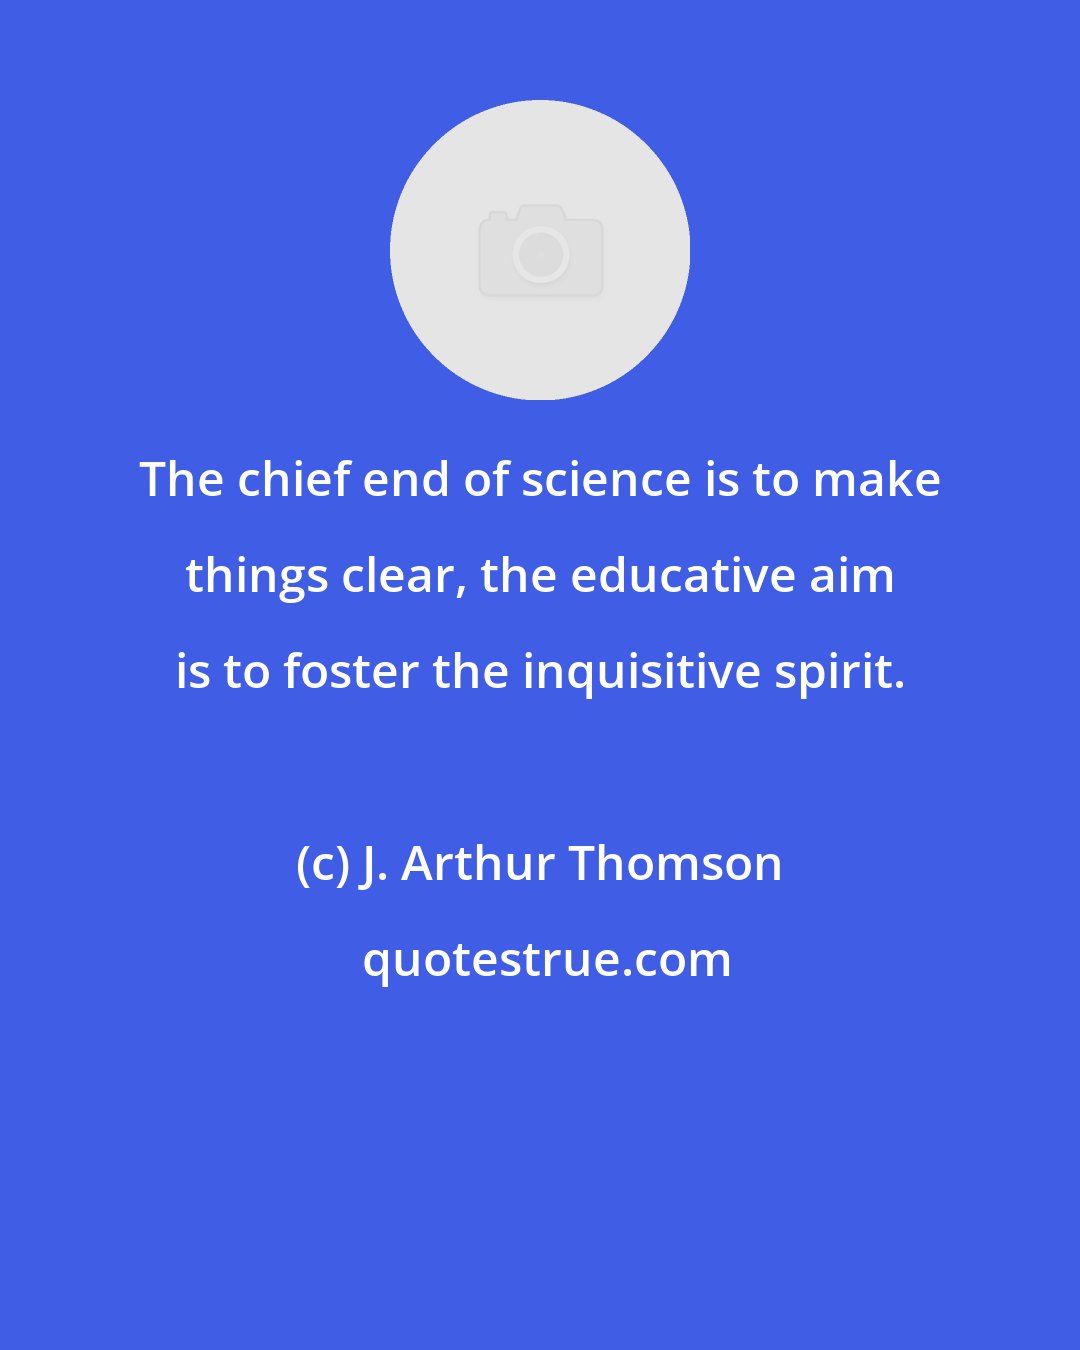 J. Arthur Thomson: The chief end of science is to make things clear, the educative aim is to foster the inquisitive spirit.